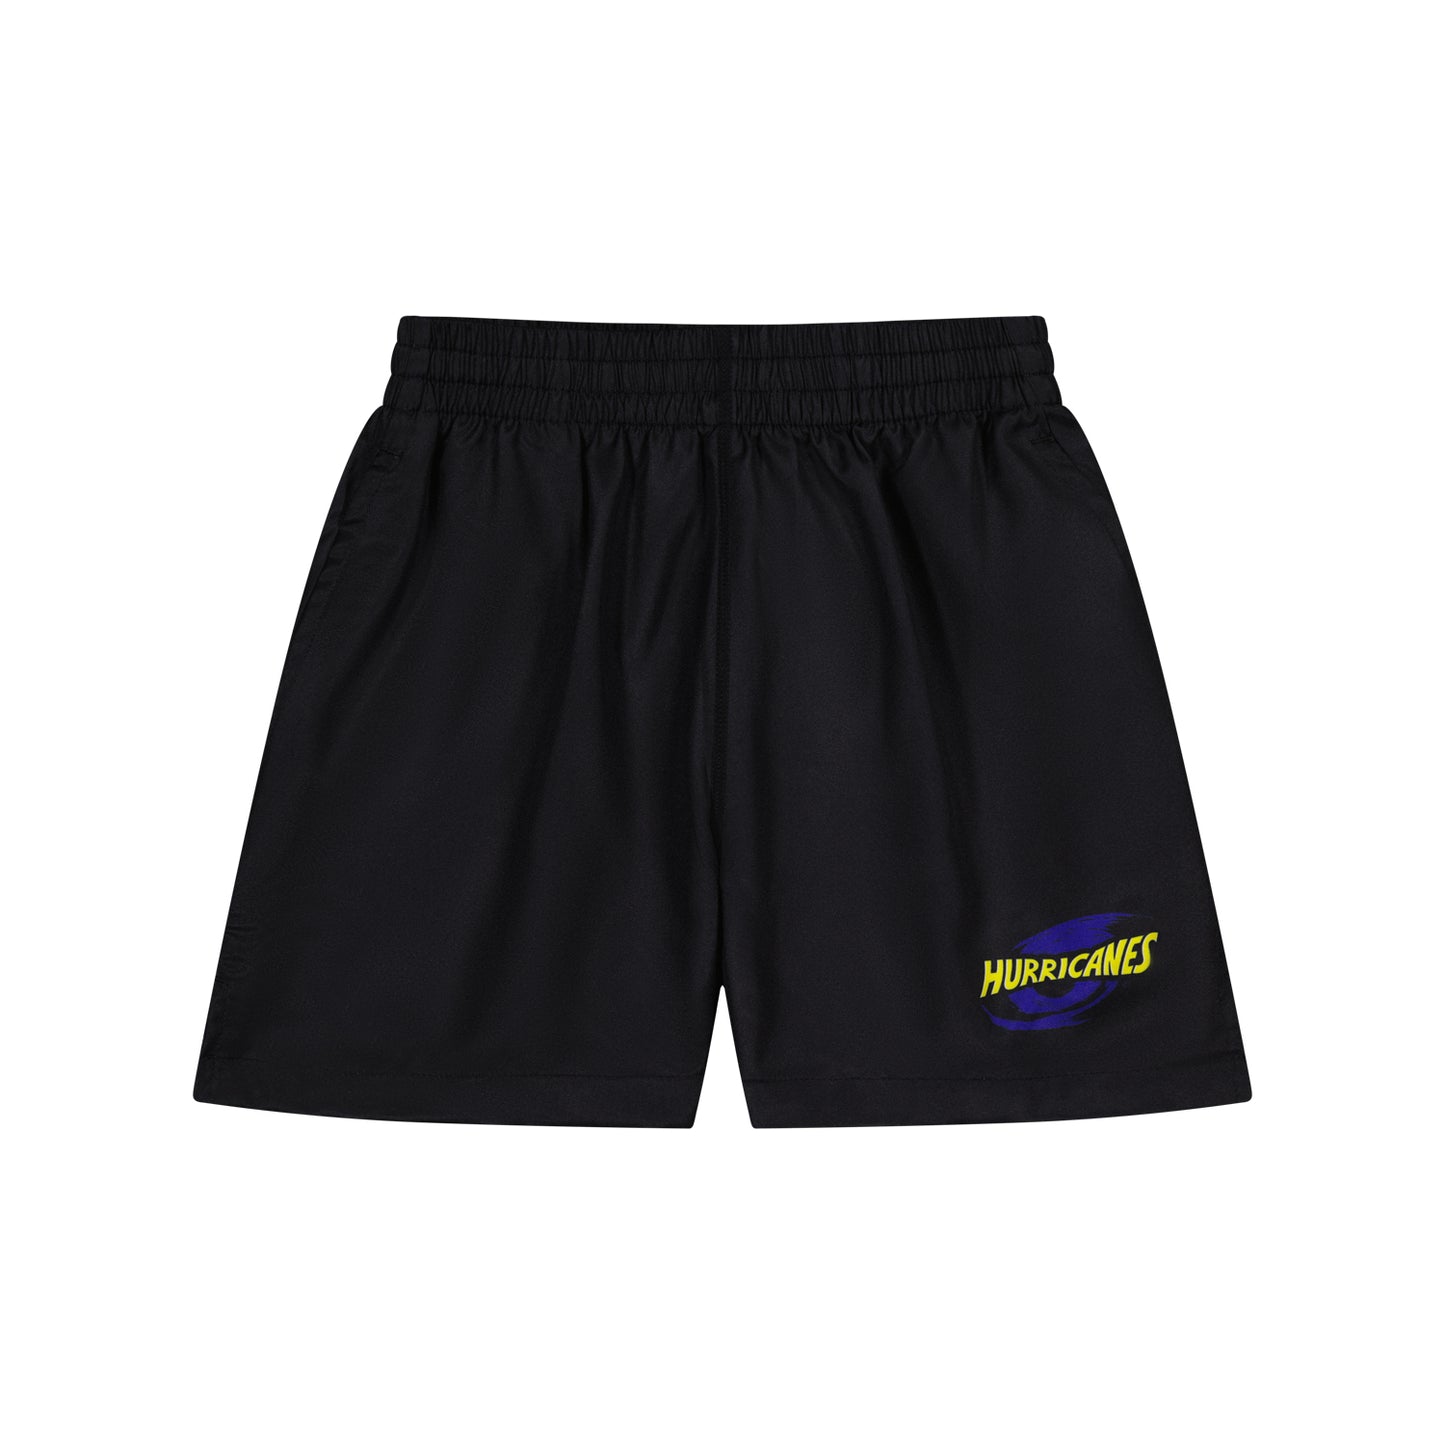 Hurricanes Youth Rugby Shorts